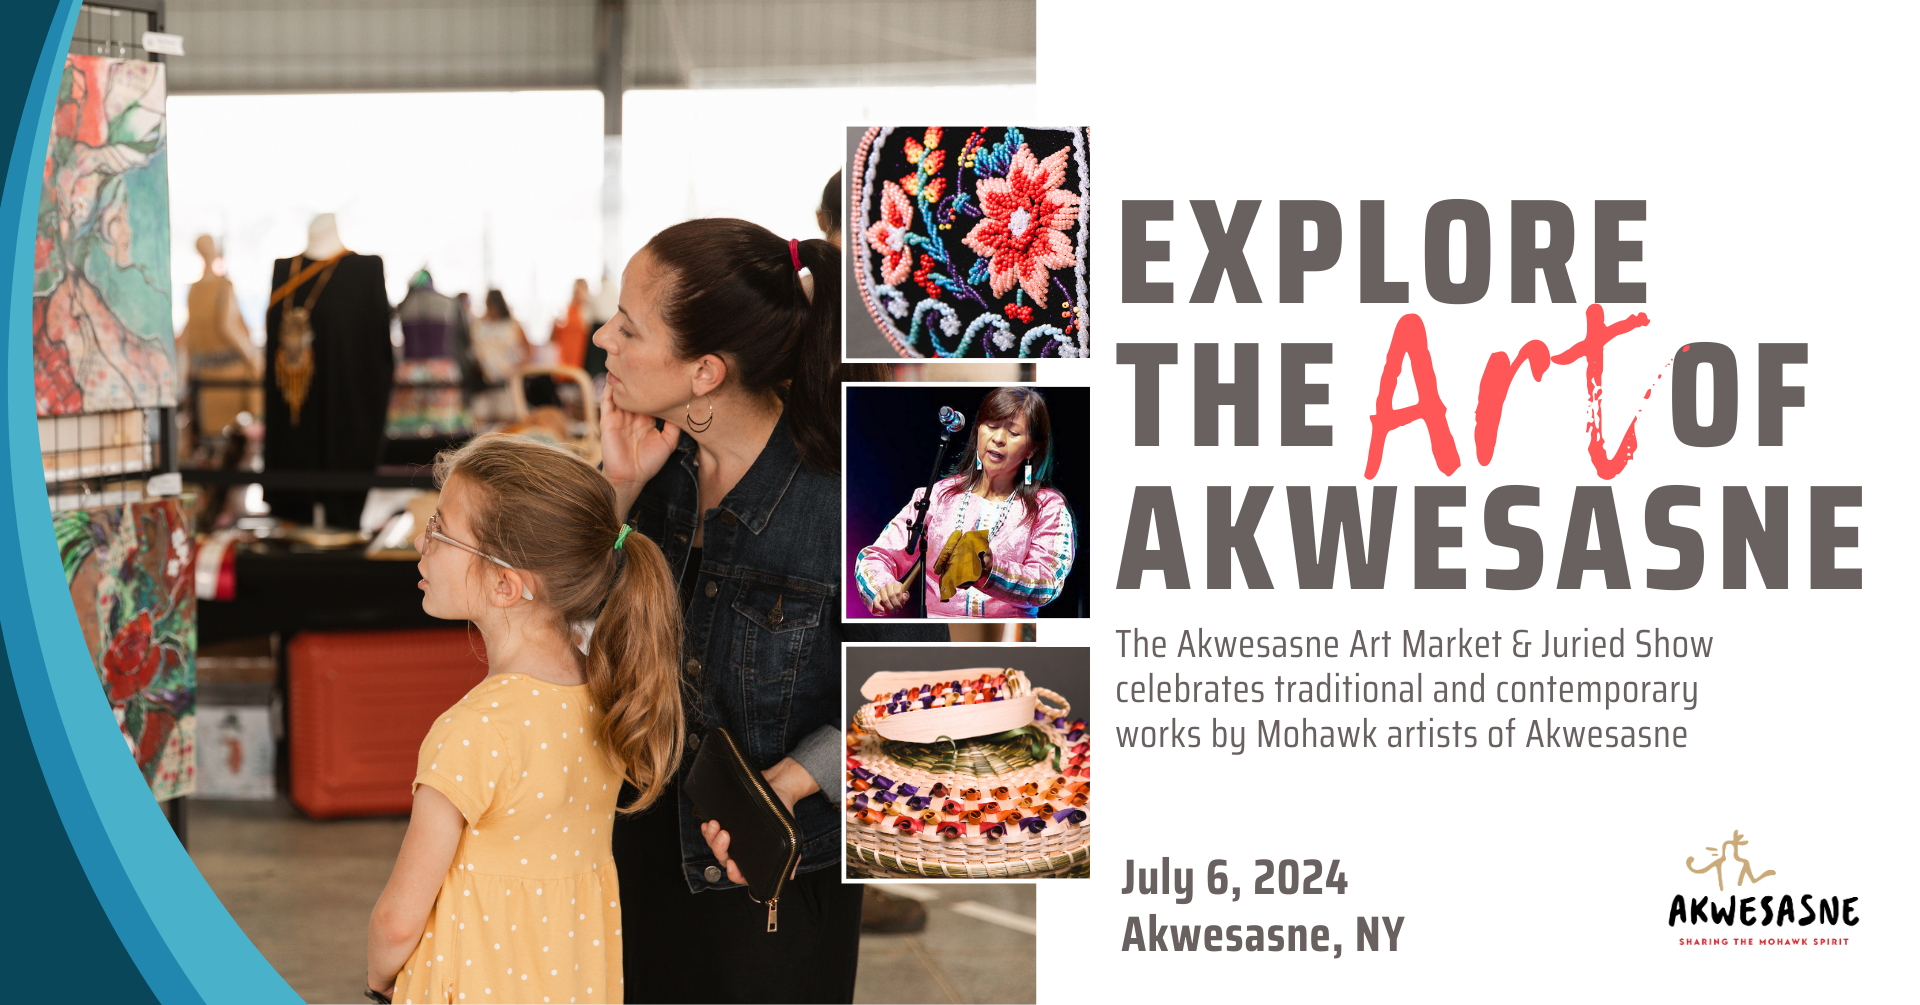 Mark your calendars! Akwesasne Travel announces the 3rd Akwesasne Art Market & Juried Show will take place on Saturday, July 6, 2024 at Generations Park. This highly anticipated summer celebration showcases the best traditional and contemporary works by Mohawk artists of Akwesasne, and offers a rich Indigenous cultural experience in the North Country's Seaway Valley region. 